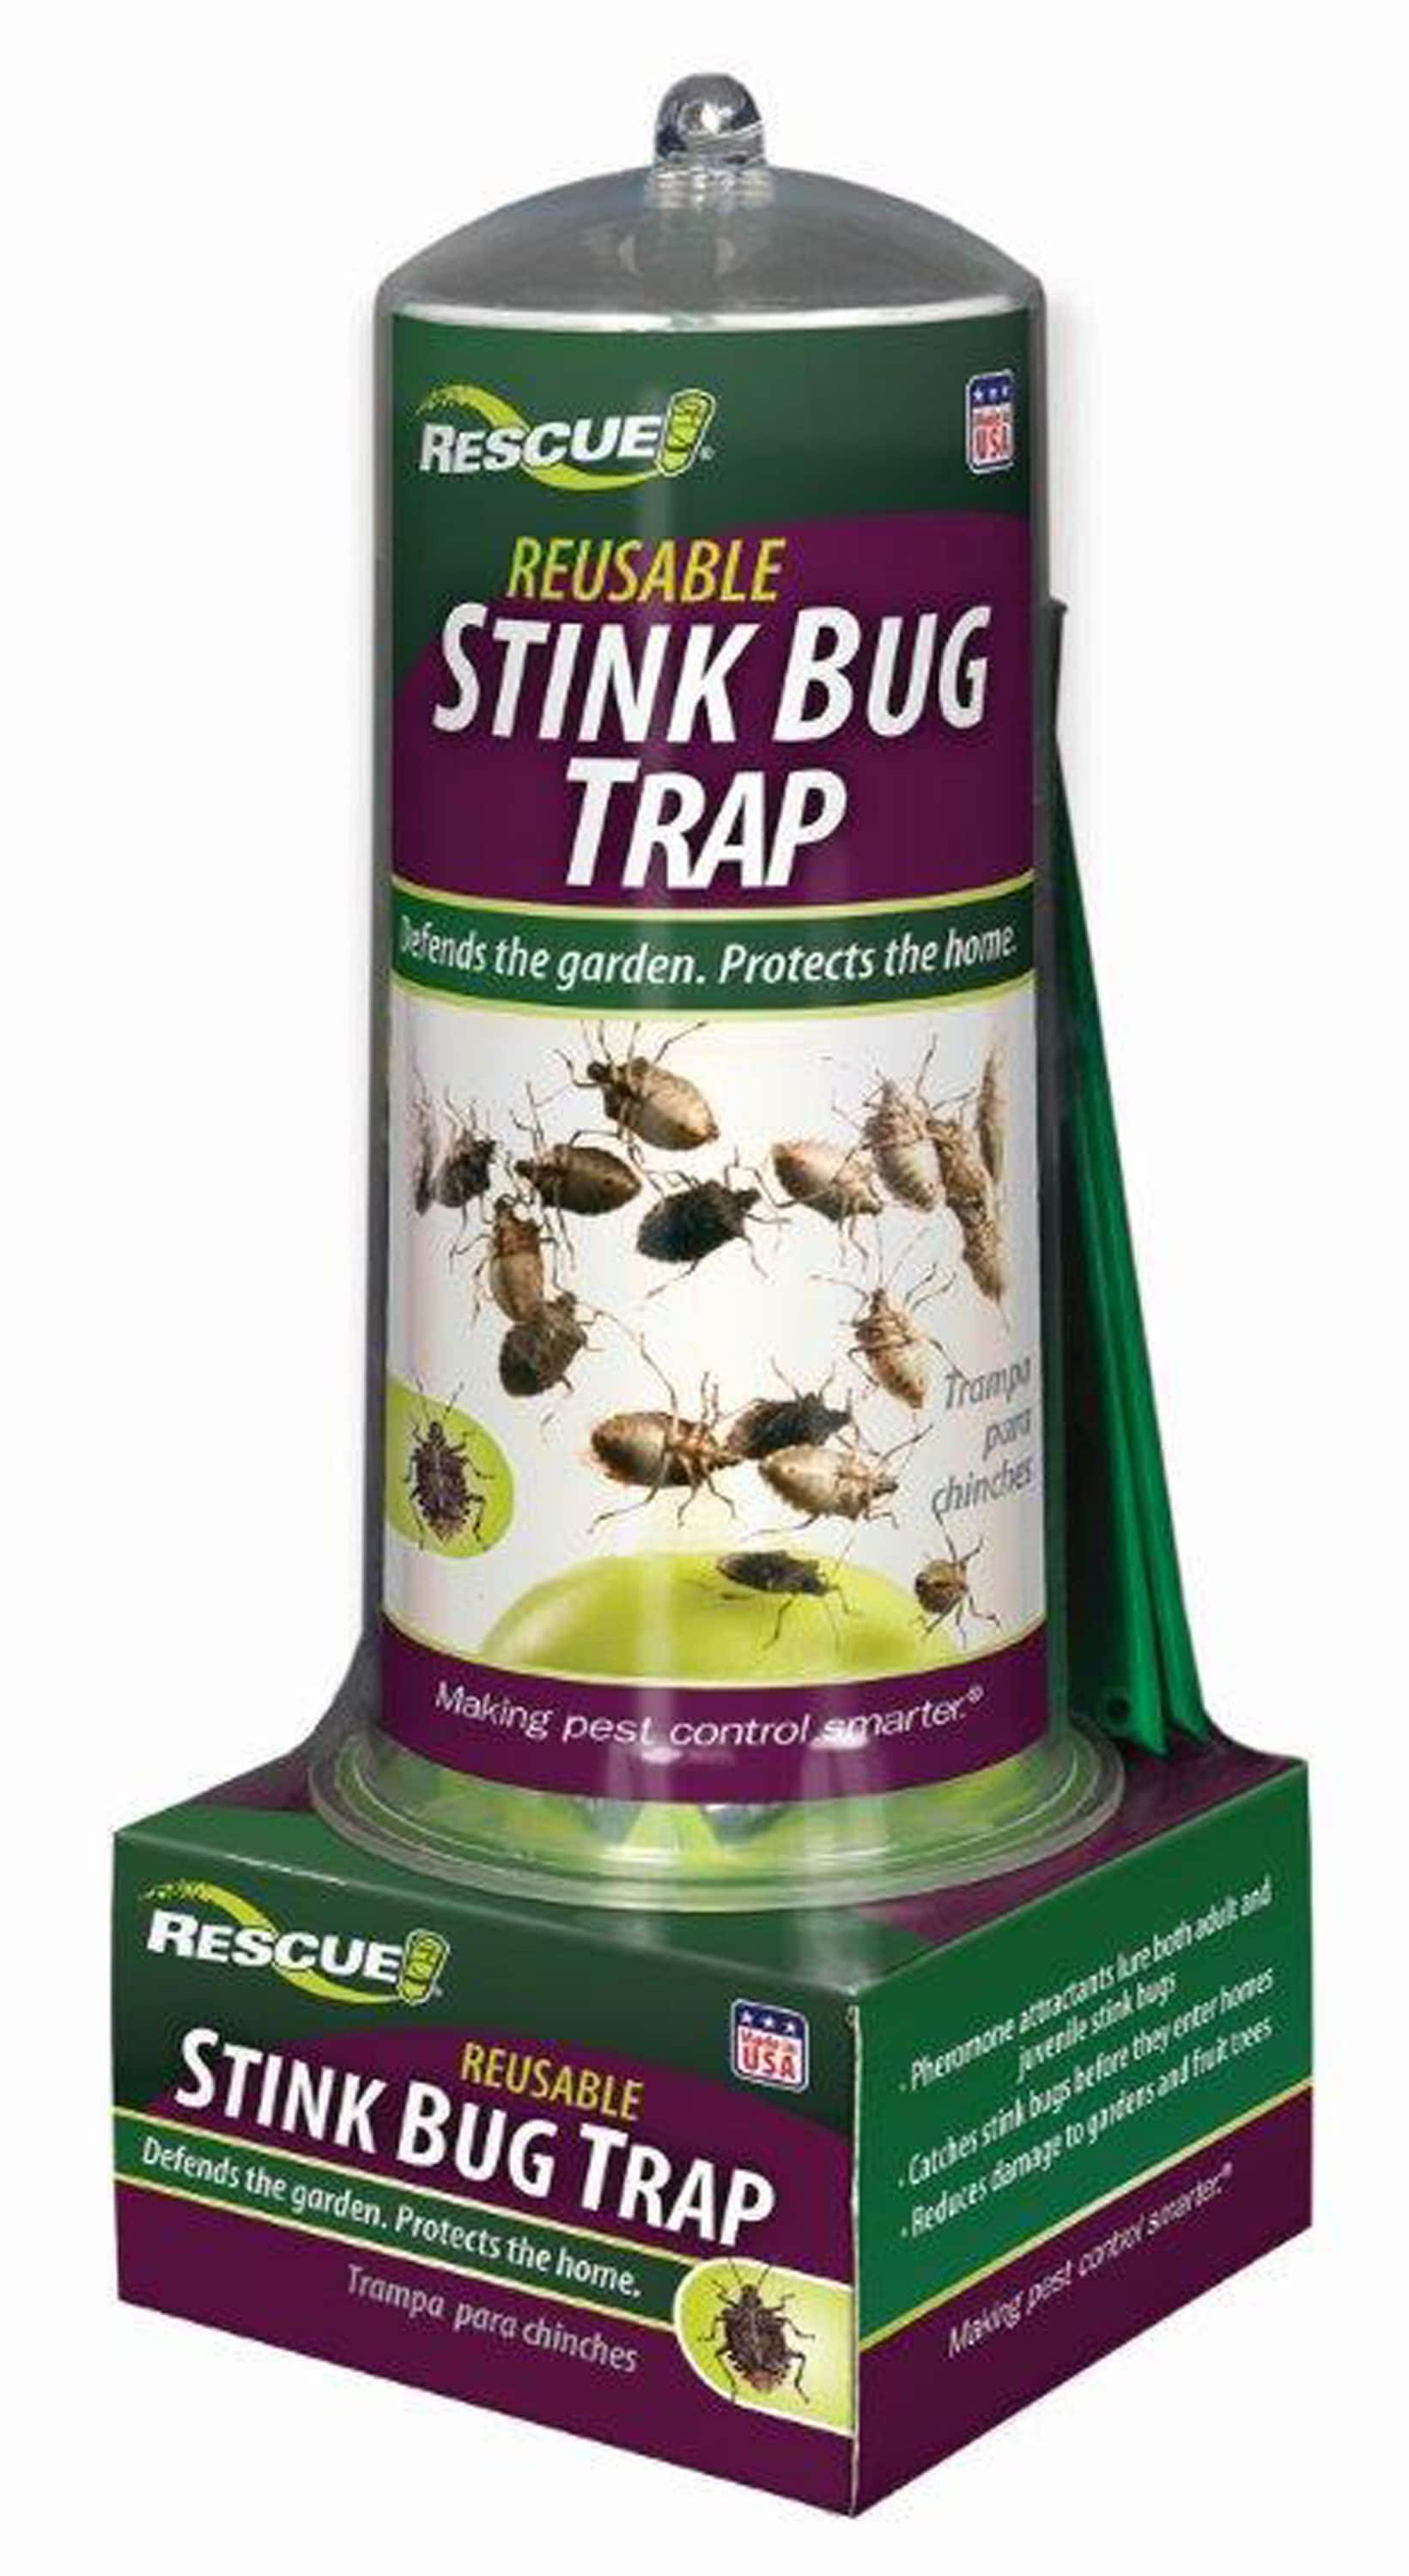 Cheap and Easy Stink-Bug Soda Bottle Trap  Stink bug repellent, Stink bugs,  Stink bug trap